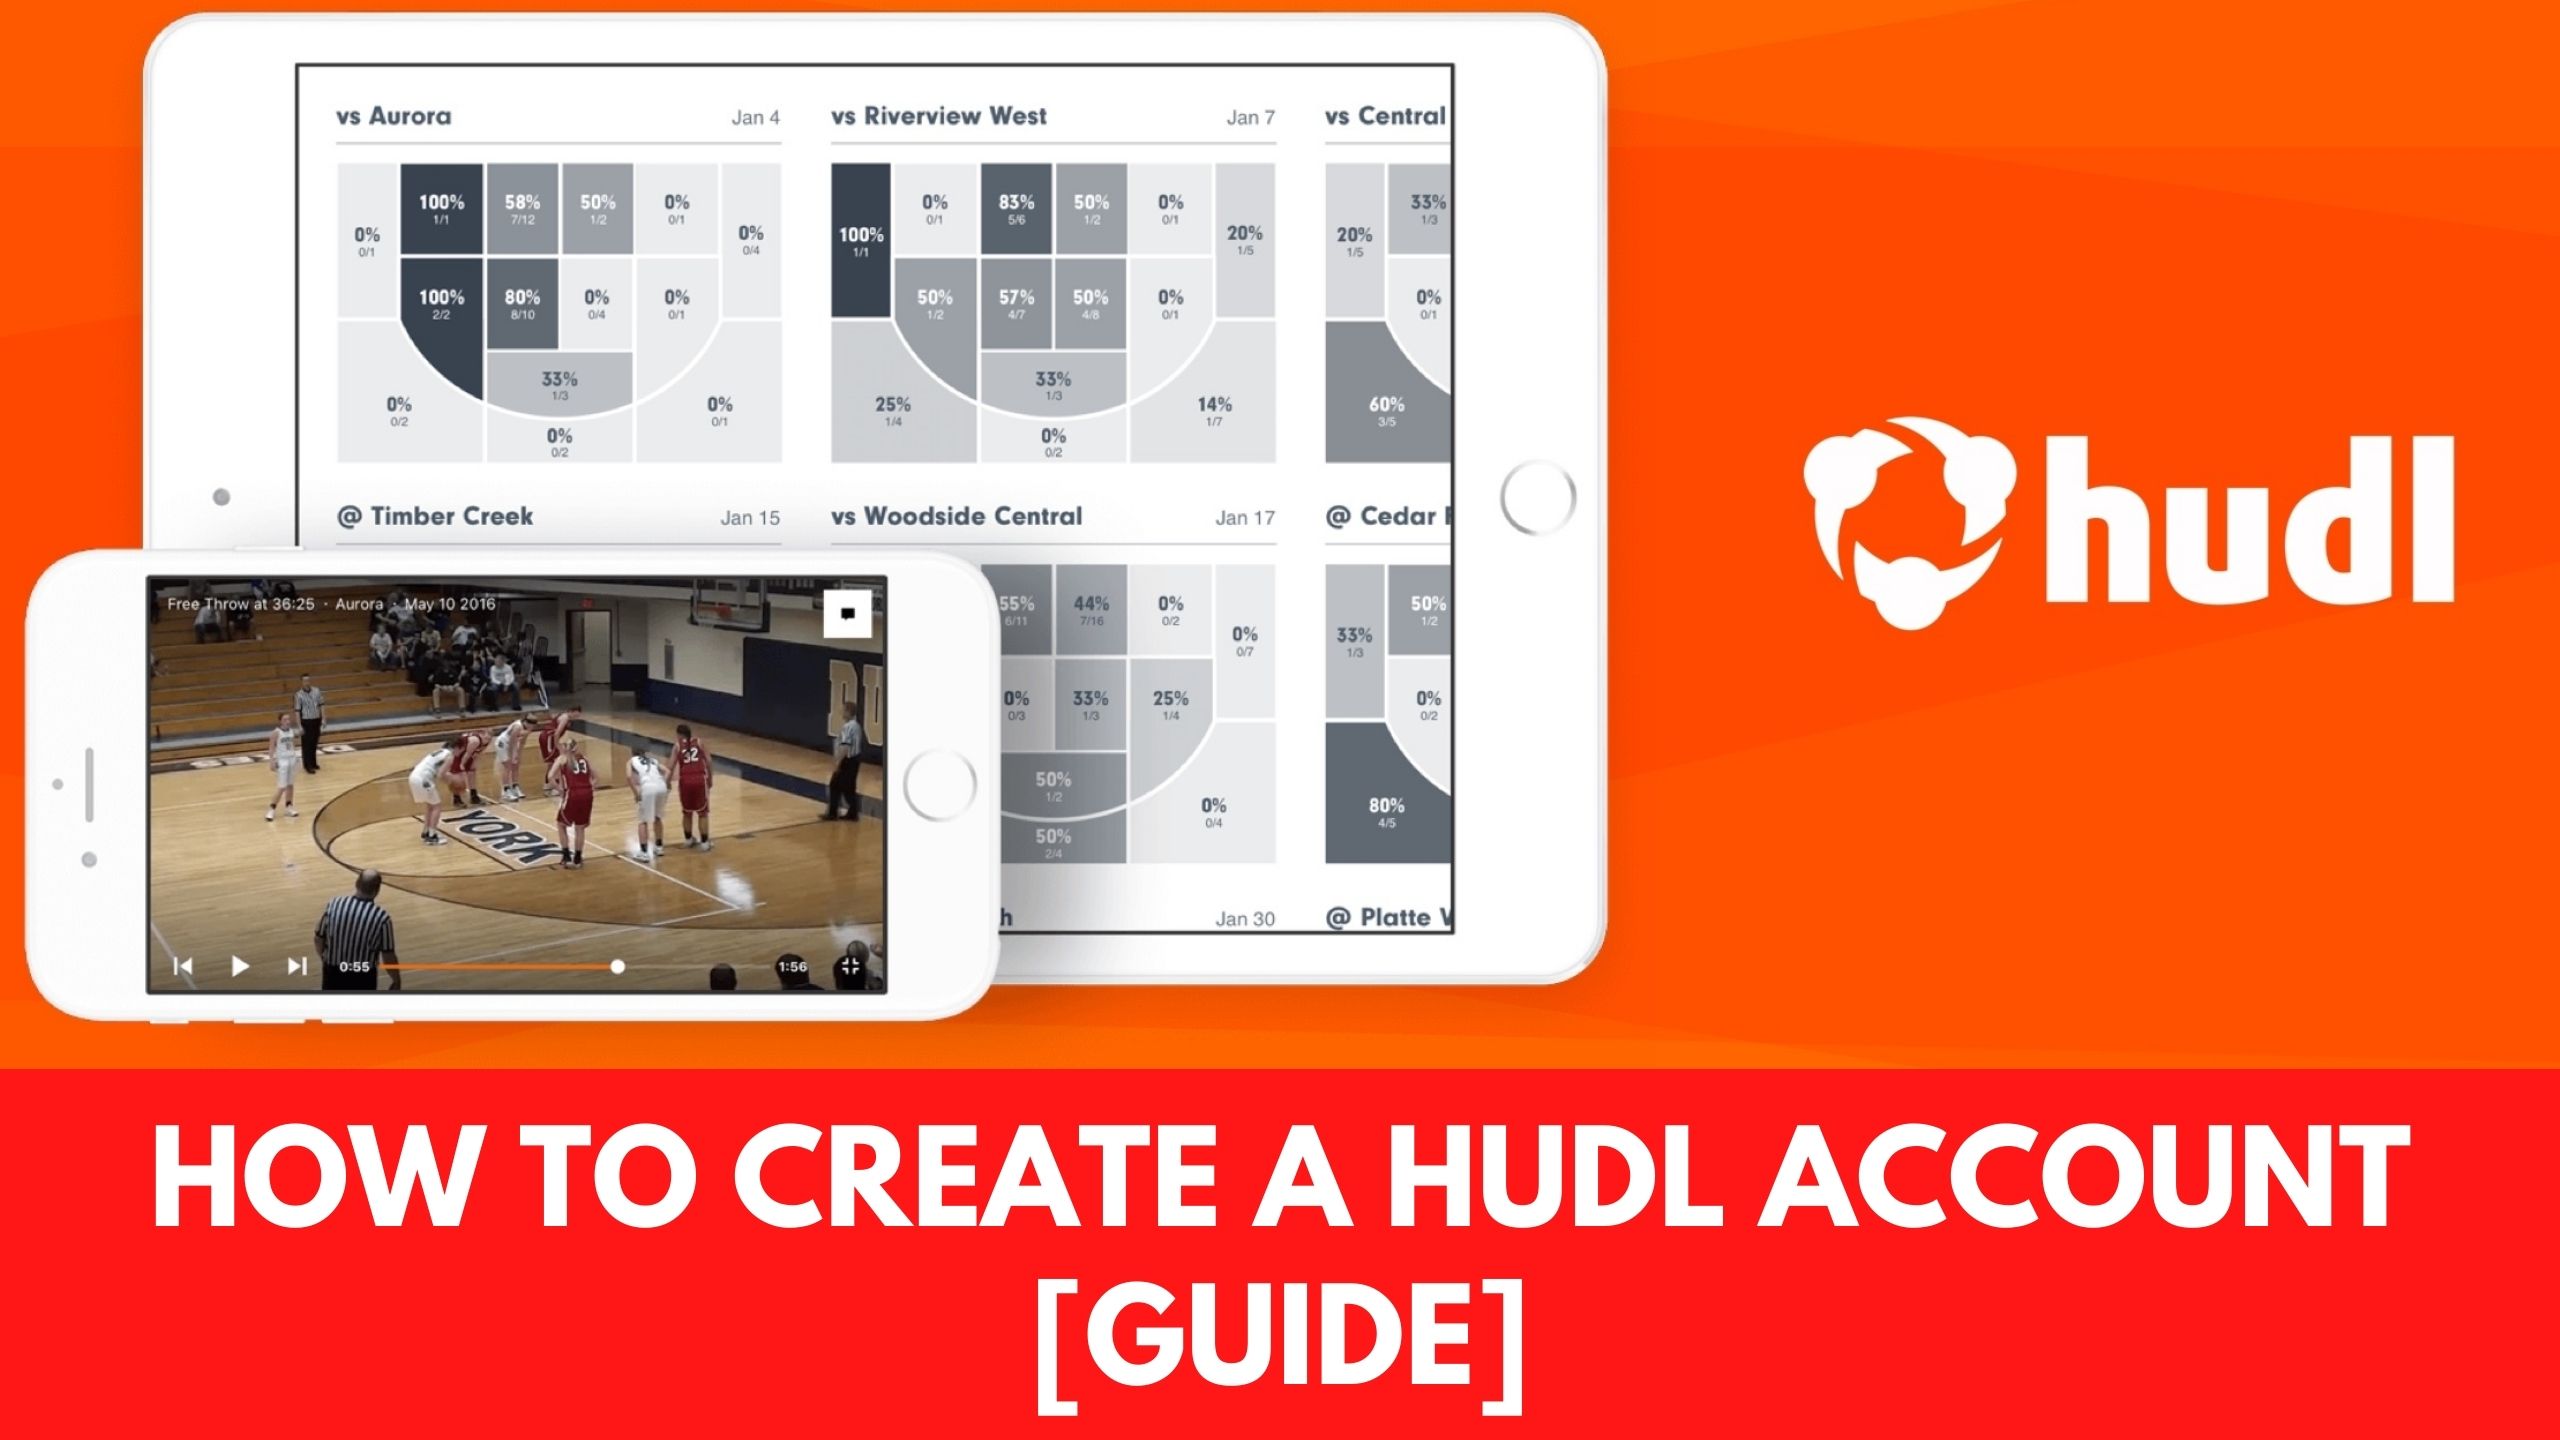 How to create a Hudl account